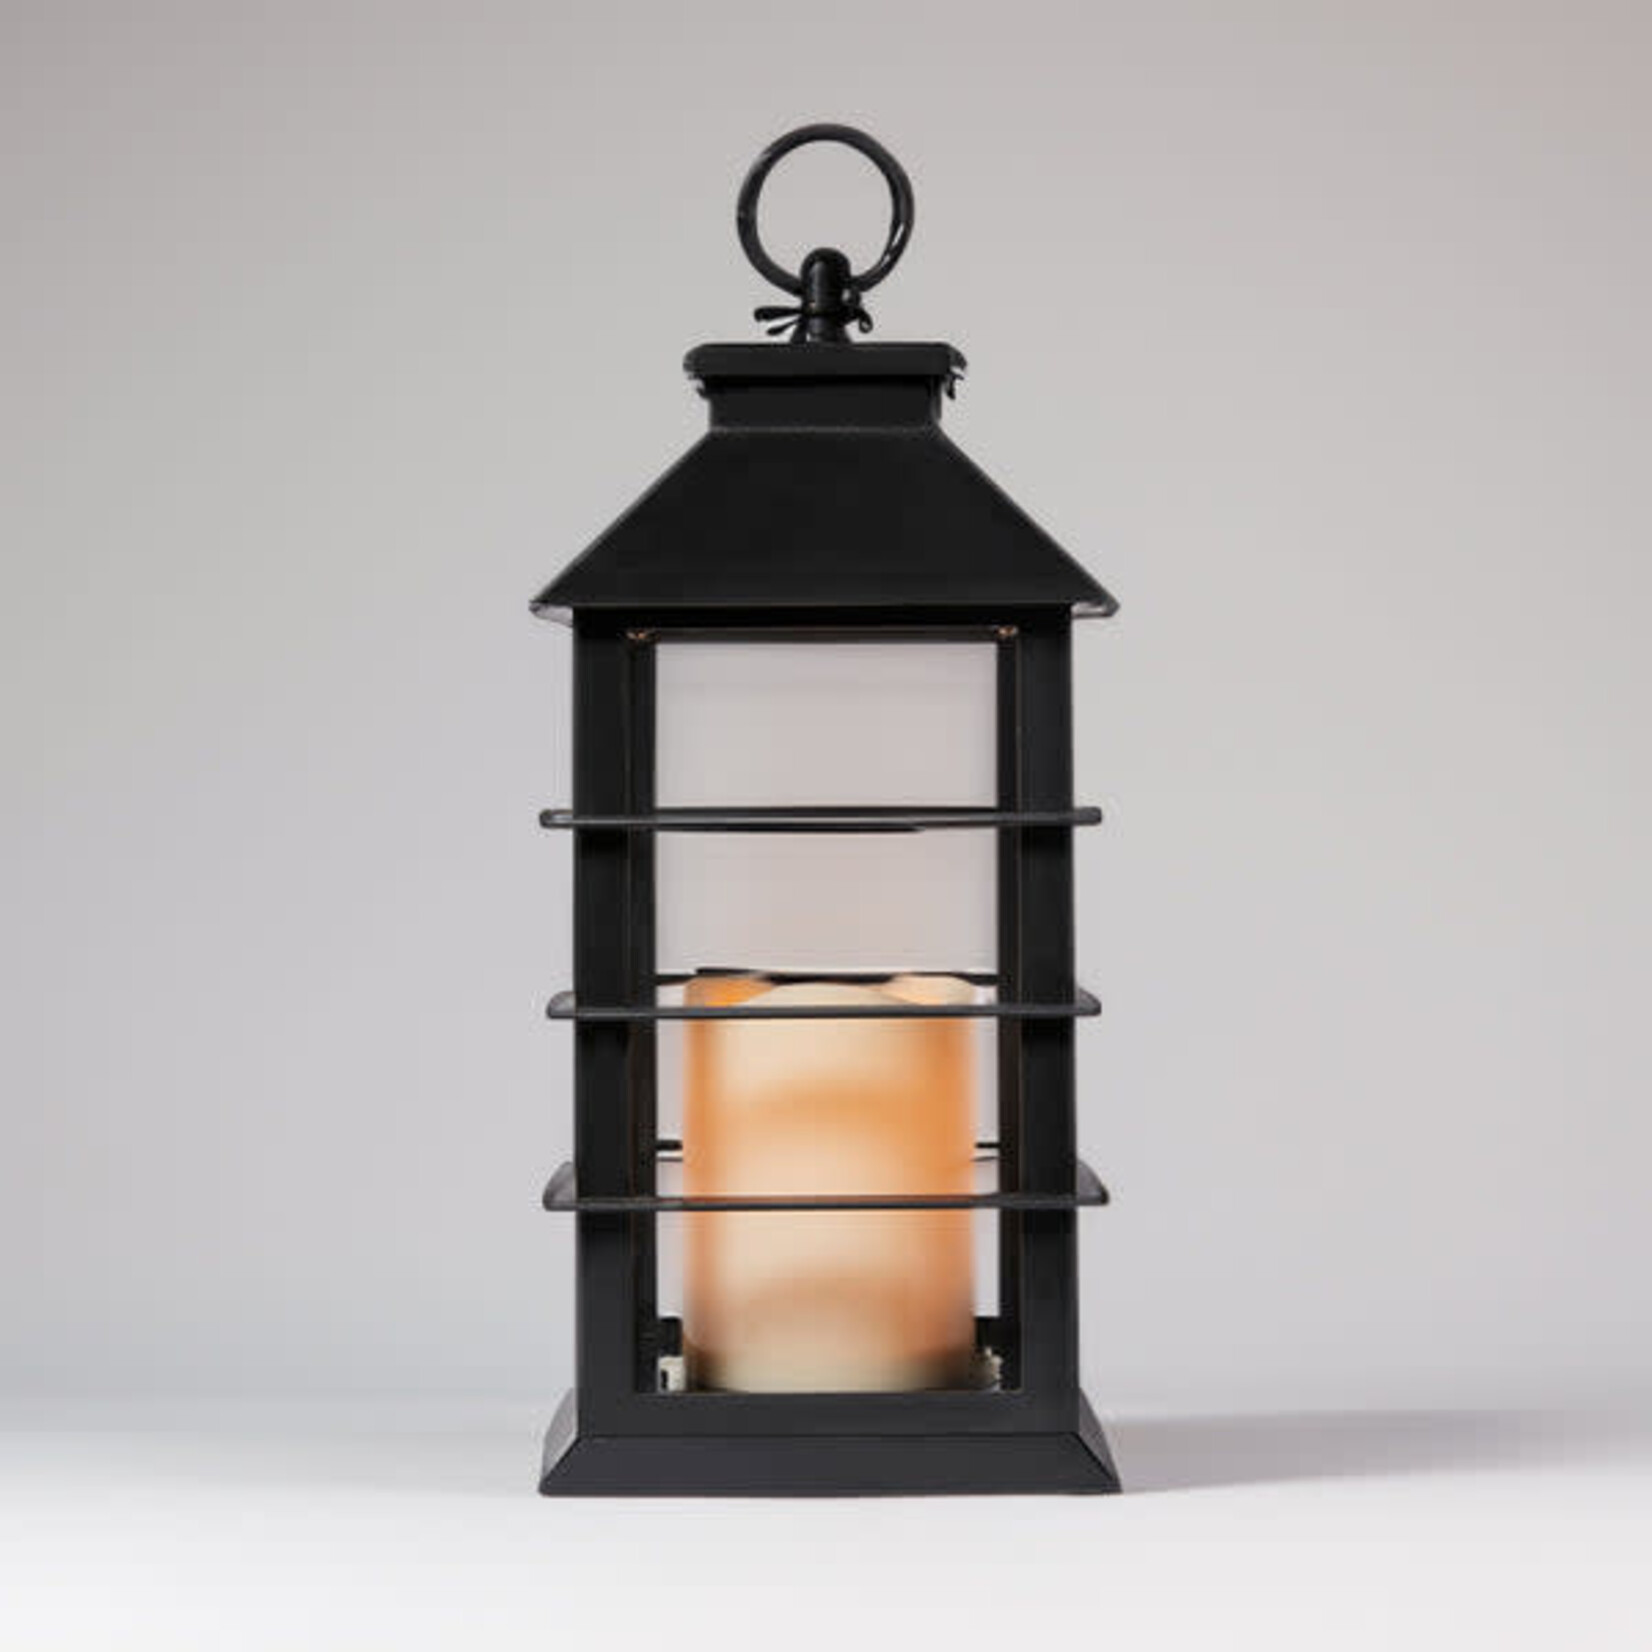 A Cheerful Giver Black Flameless Lantern